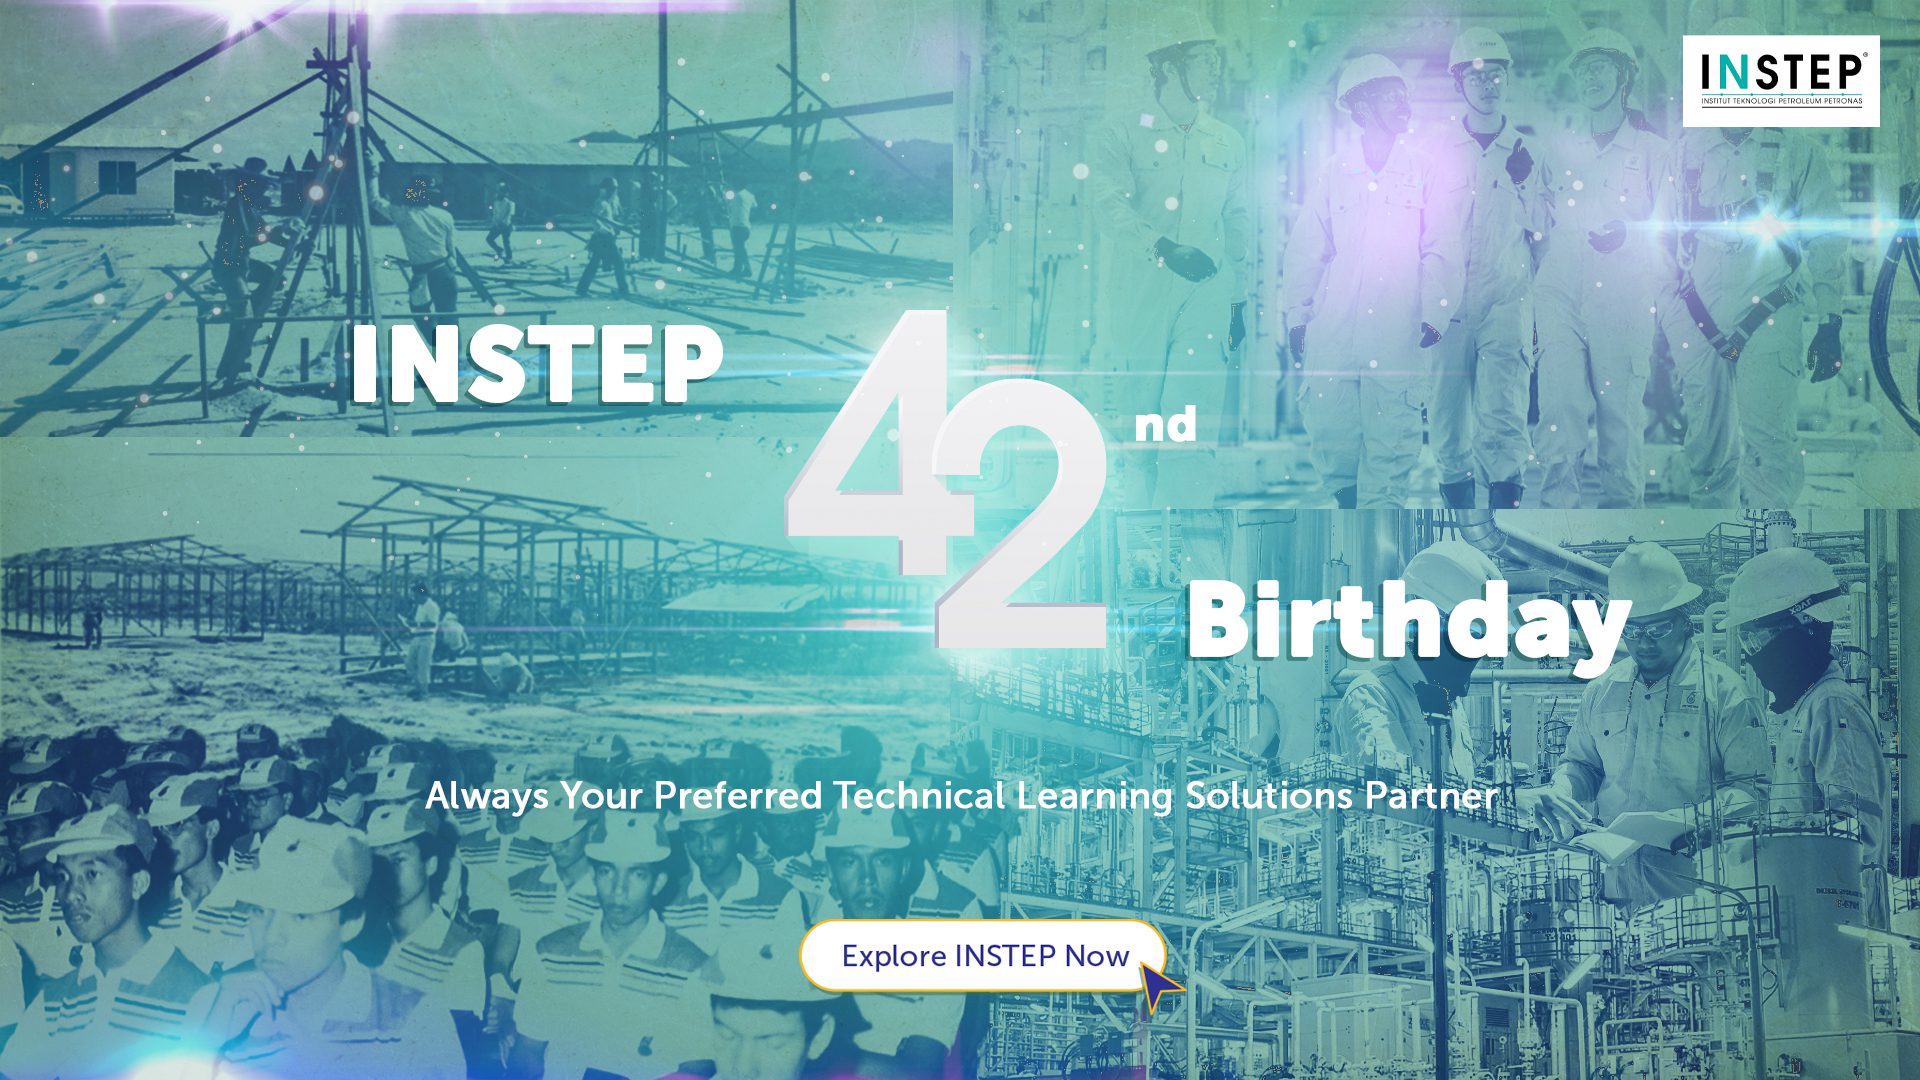 Celebrating 42 Years of Developing Energy Talents with INSTEP Today!